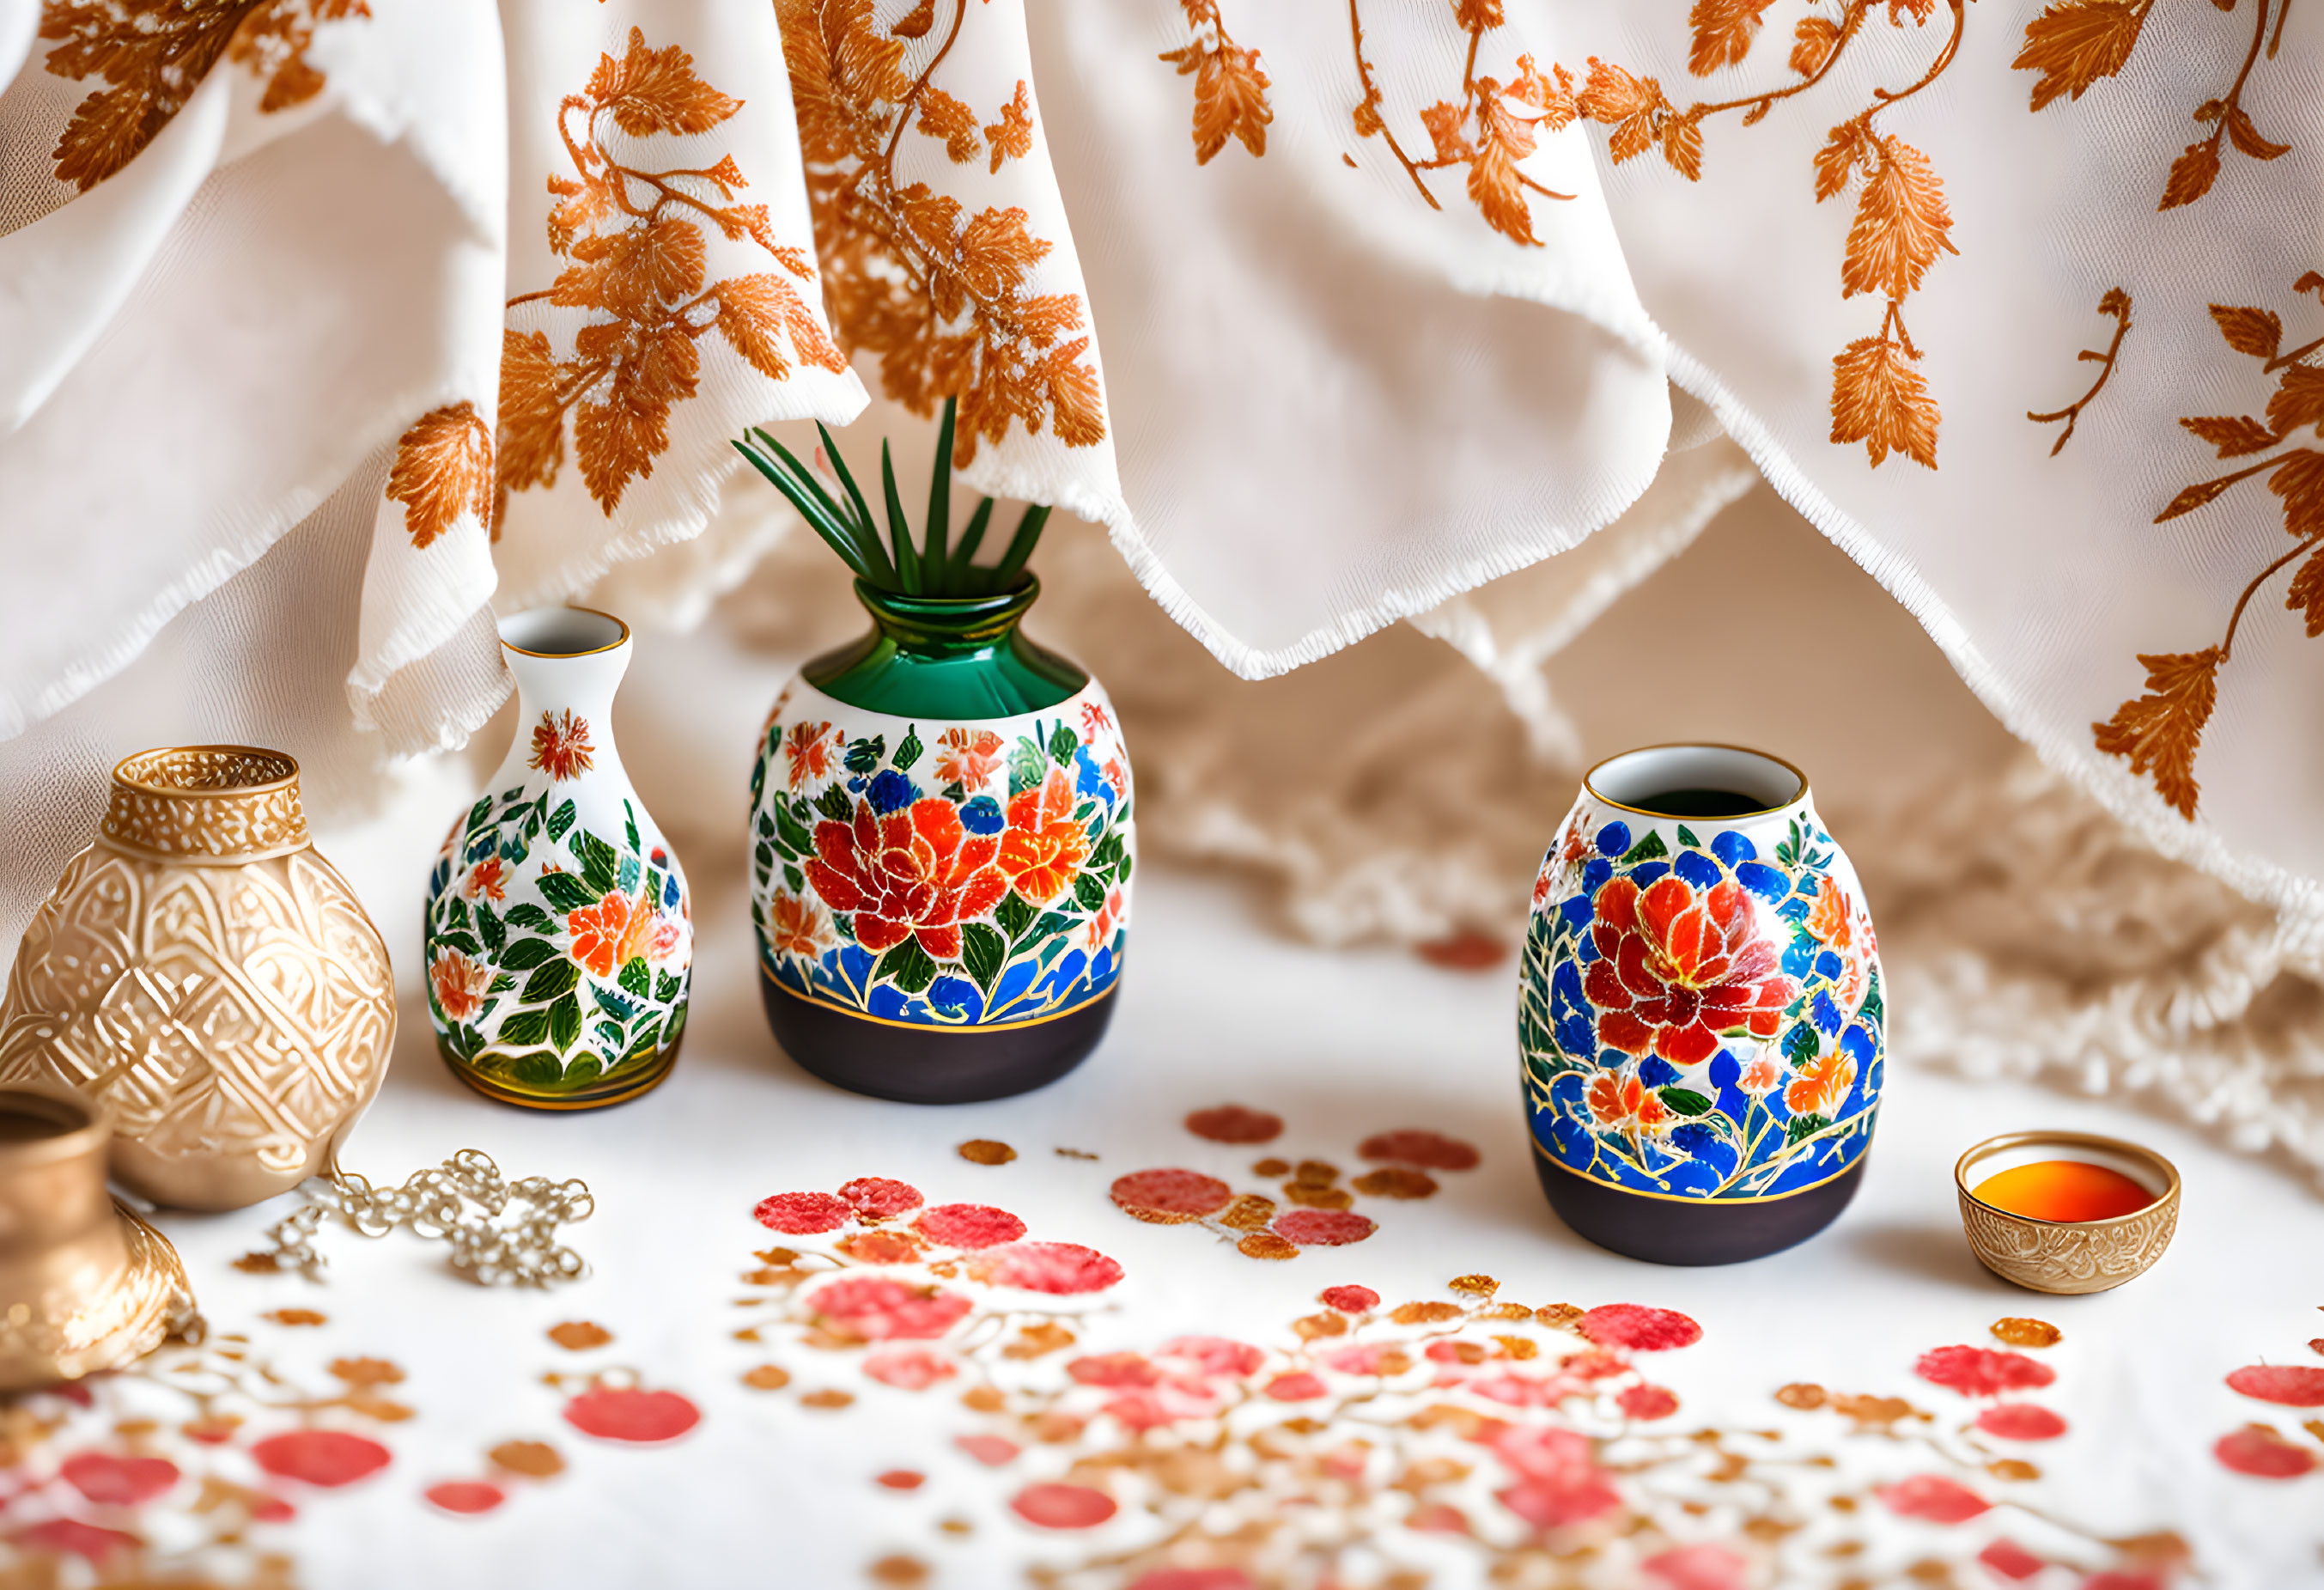 Luxurious Floral Vases and Gilded Ornaments